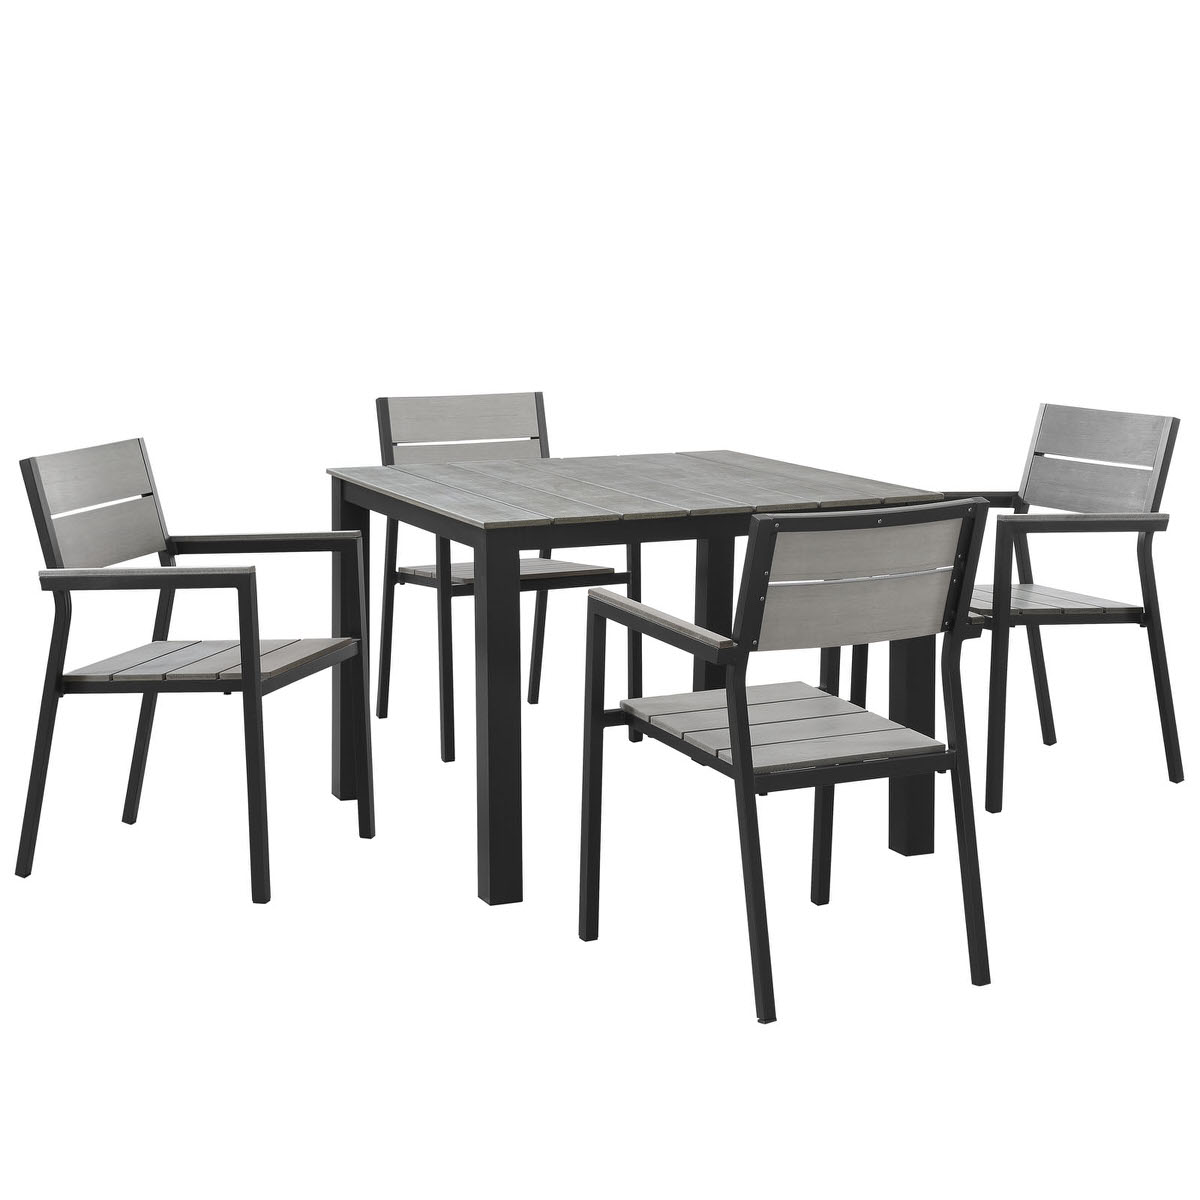 Maine 5 Piece Outdoor Patio Dining Set Brown Gray 1 by Modern Living